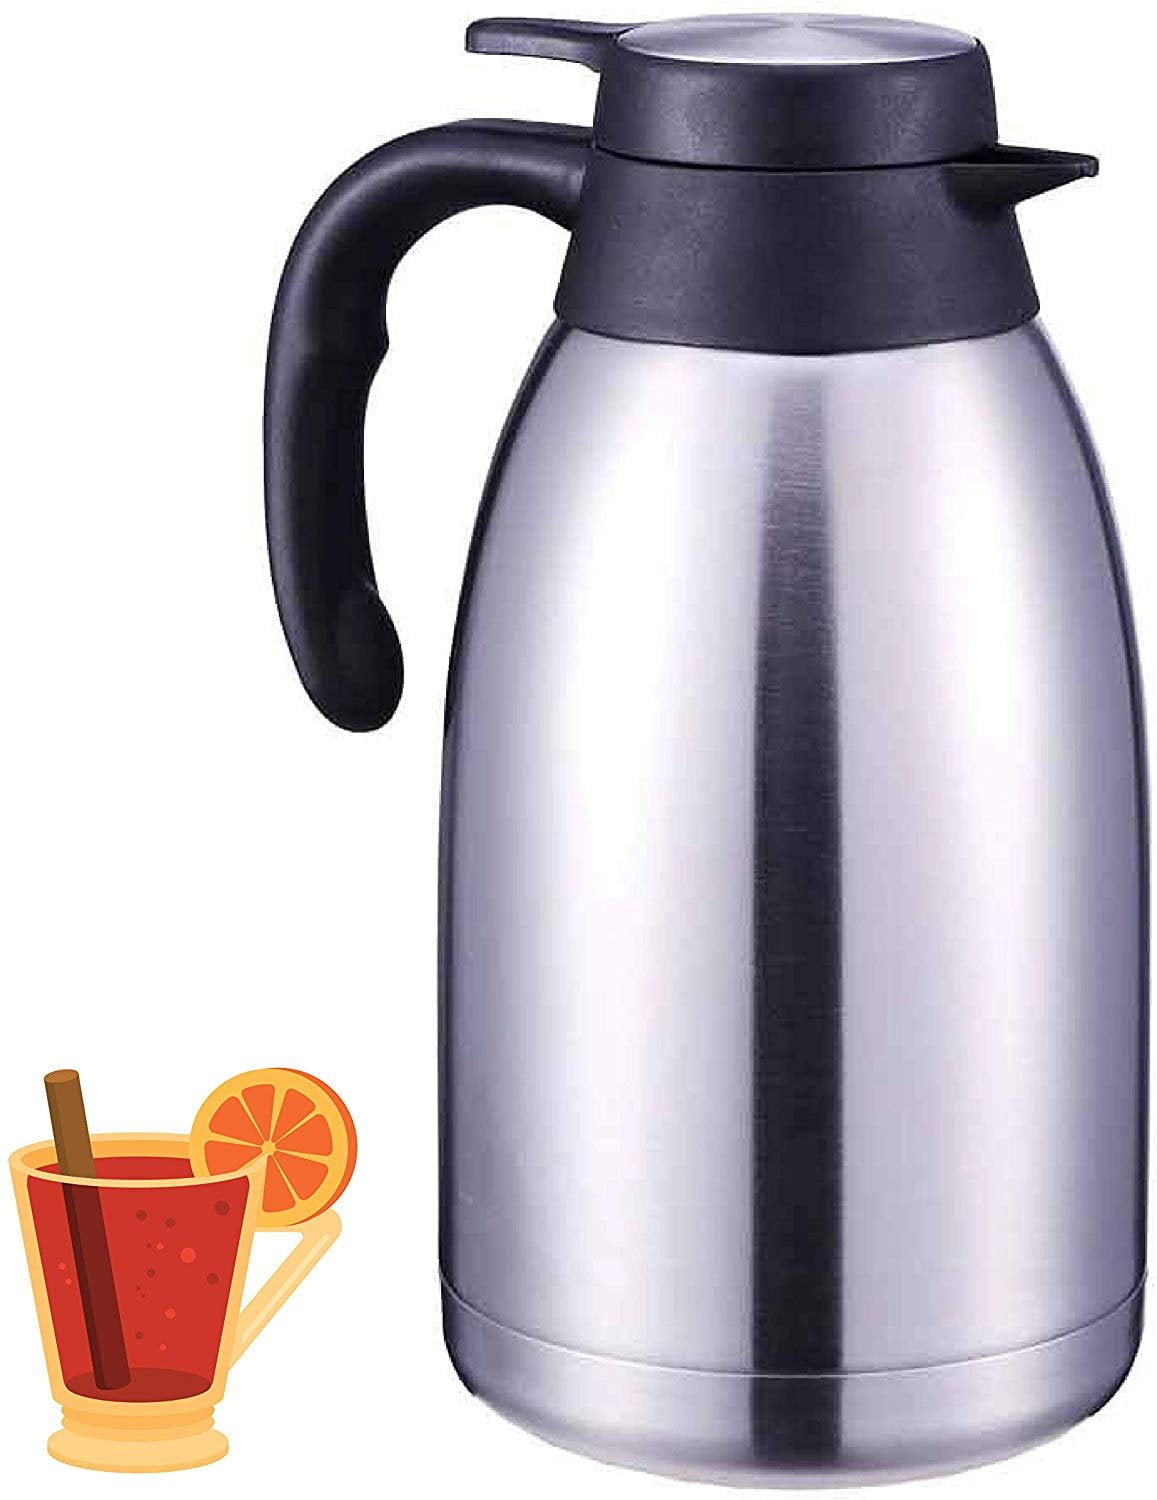 SET OF 2 UP TO 10 HOURS HEAT RETENTION CARAFE DOUBLE WALLED THERMOS 24 OZ THERMAL CARAFE STAINLESS STEEL HOT-COLD Renewed